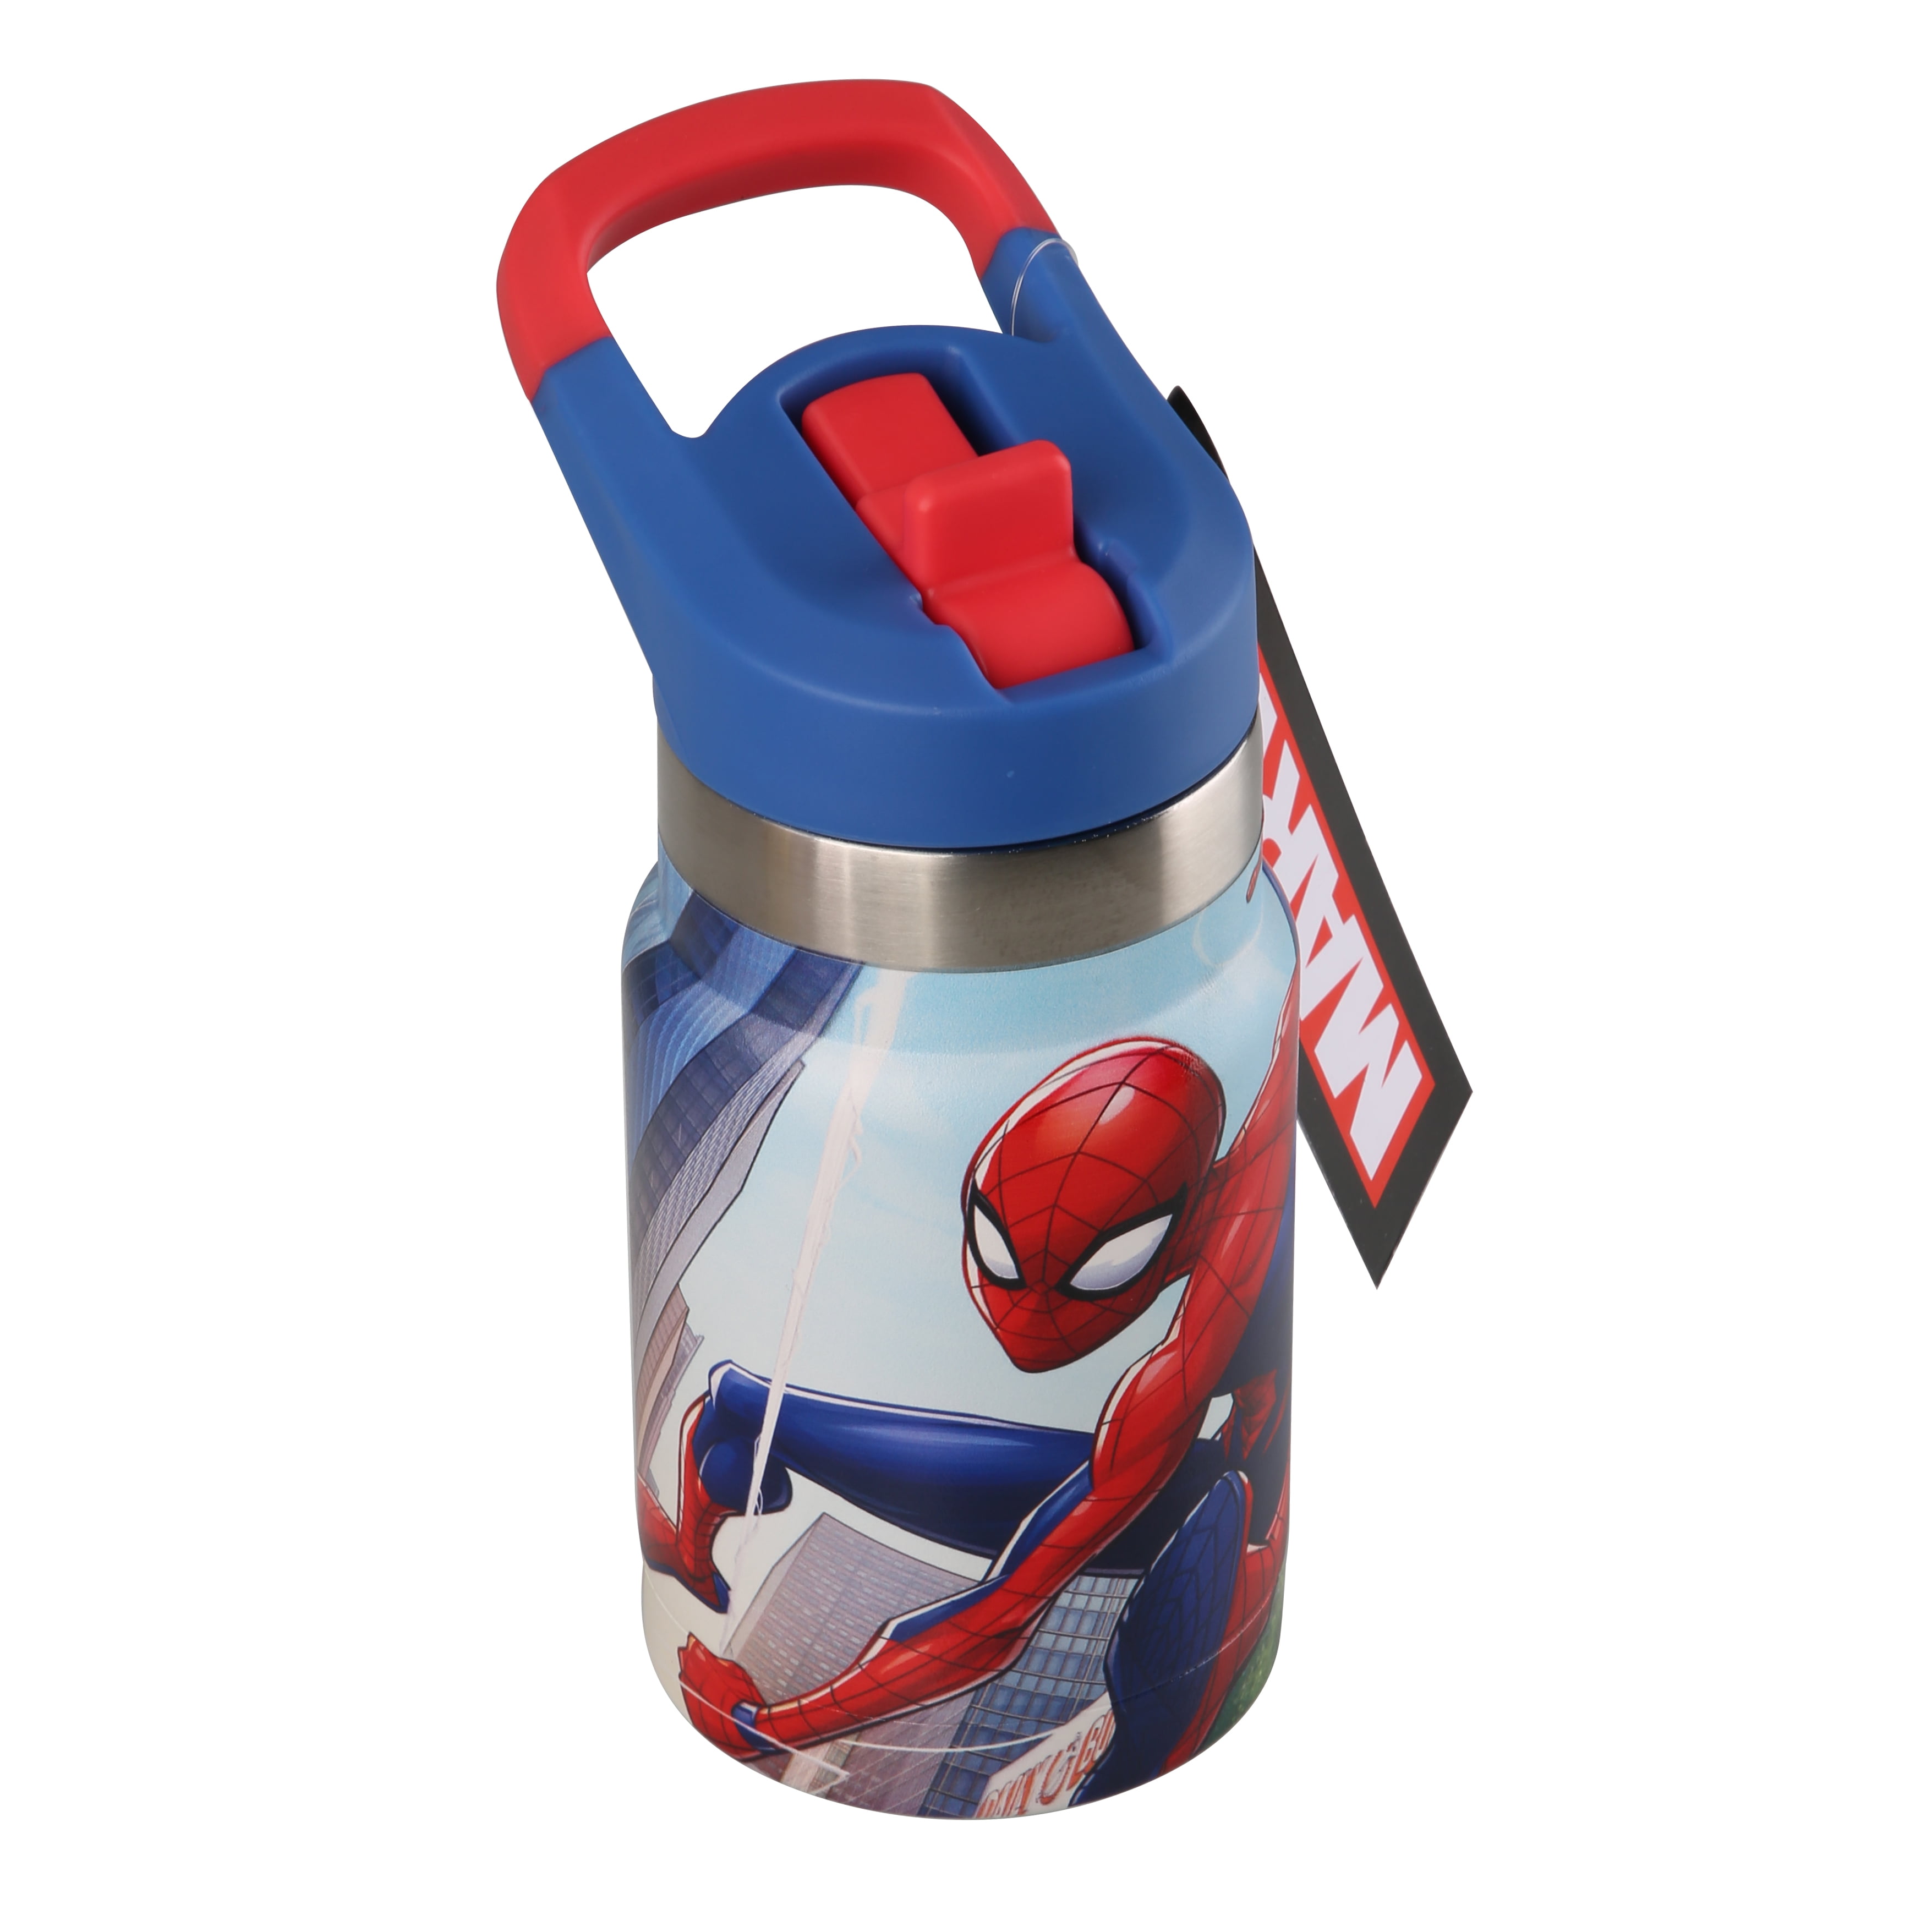 Spiderman Super Heroes LED Temperature Stainless Steel Double Wall